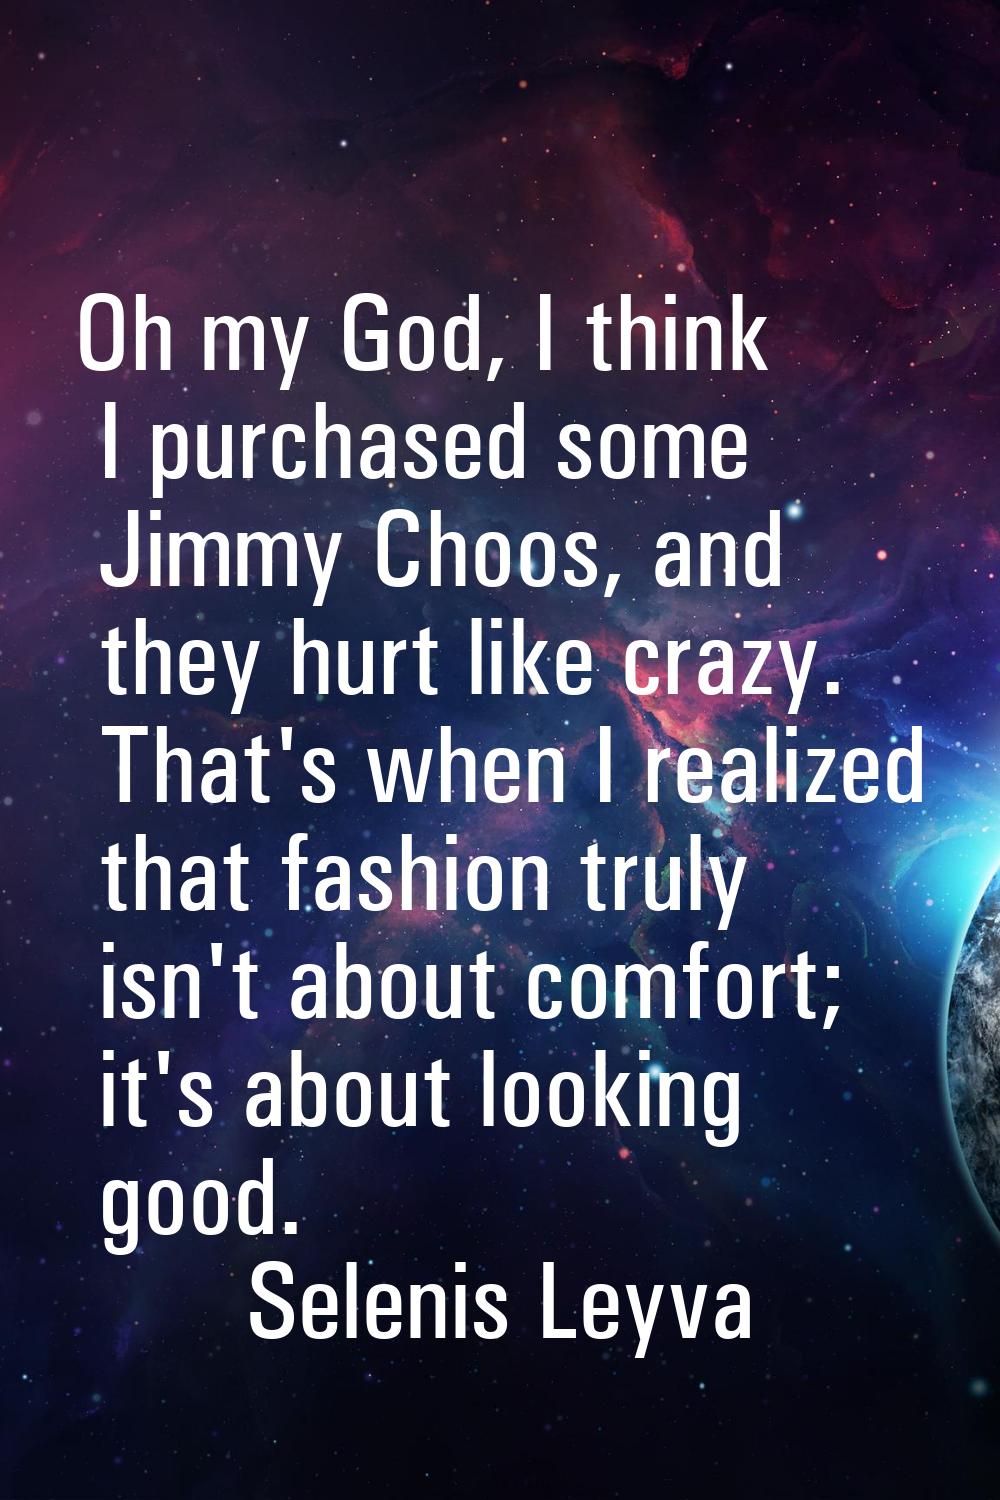 Oh my God, I think I purchased some Jimmy Choos, and they hurt like crazy. That's when I realized t